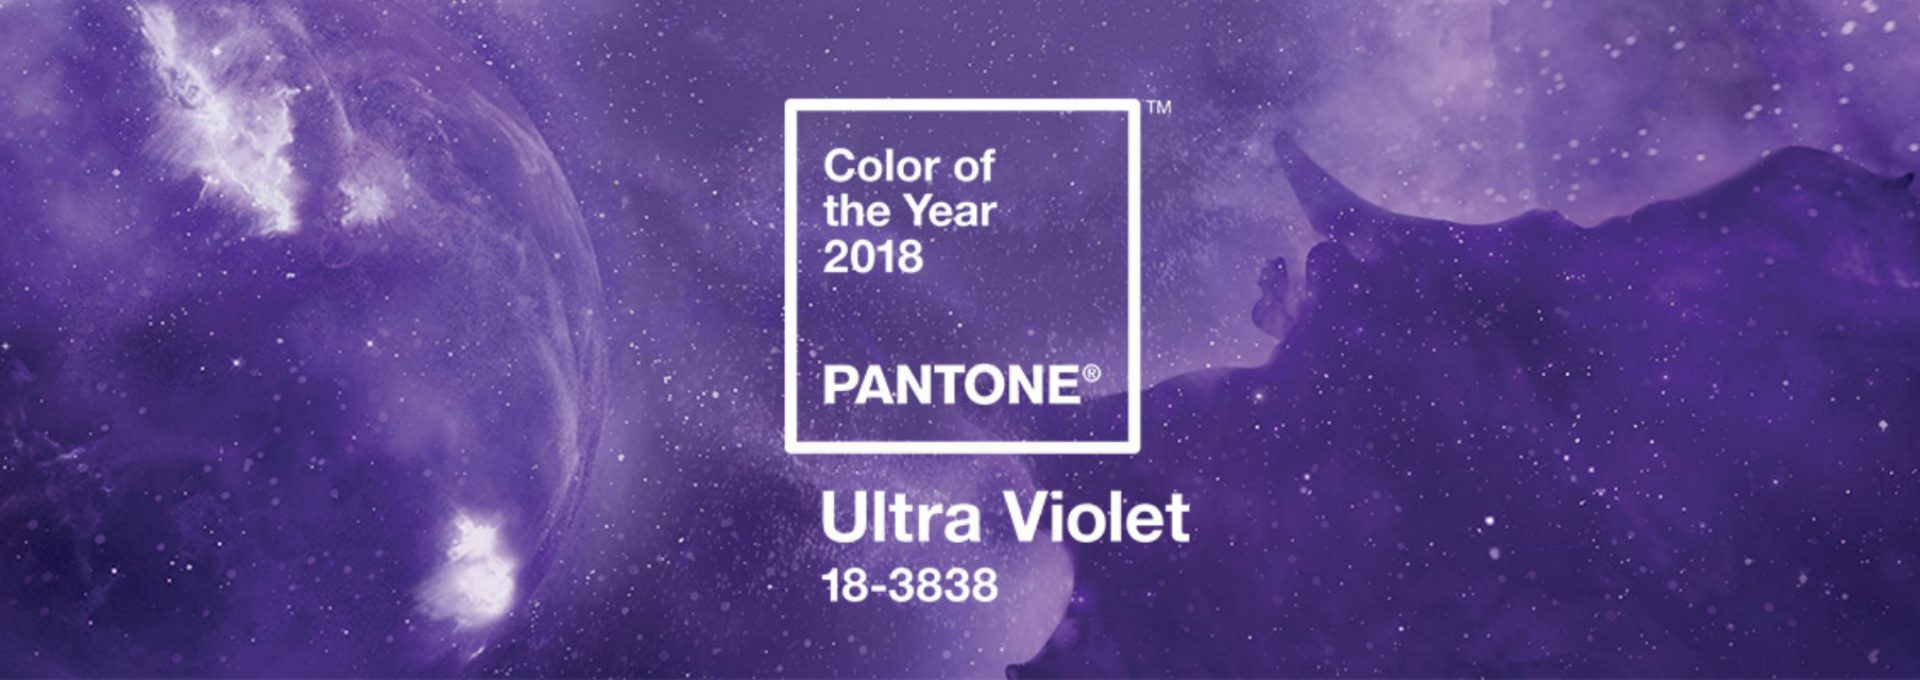 Pantone Ultra Violet - Get to Know Pantone Color of the Year 2018 ➤ Discover the season's newest design news and inspiration ideas. Visit Daily Design News and subscribe our newsletter! #dailydesignnews #designnews #Pantone #UltraViolet